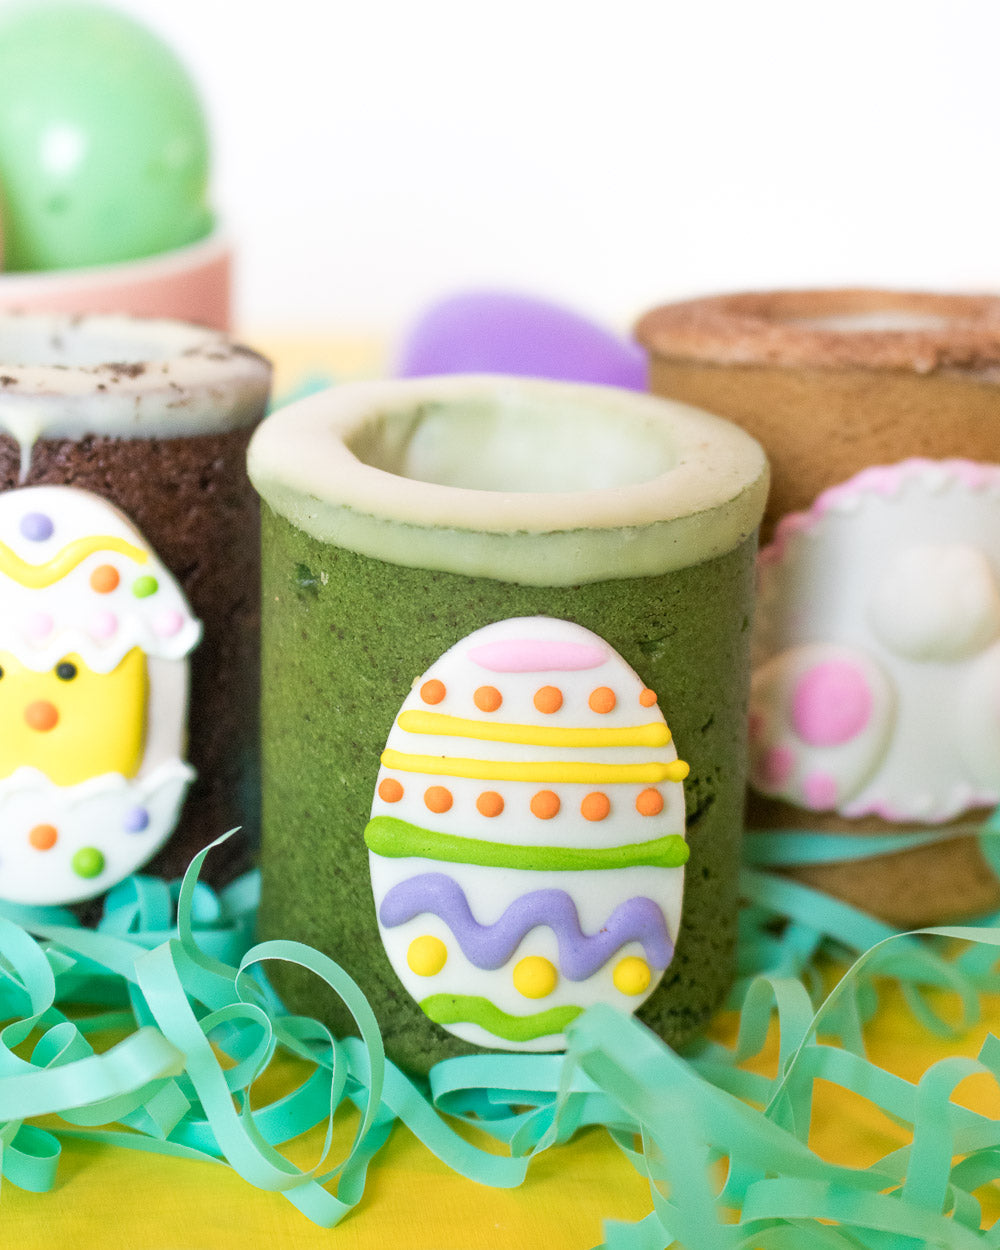 Fun Ideas for a non-traditional Easter egg hunt